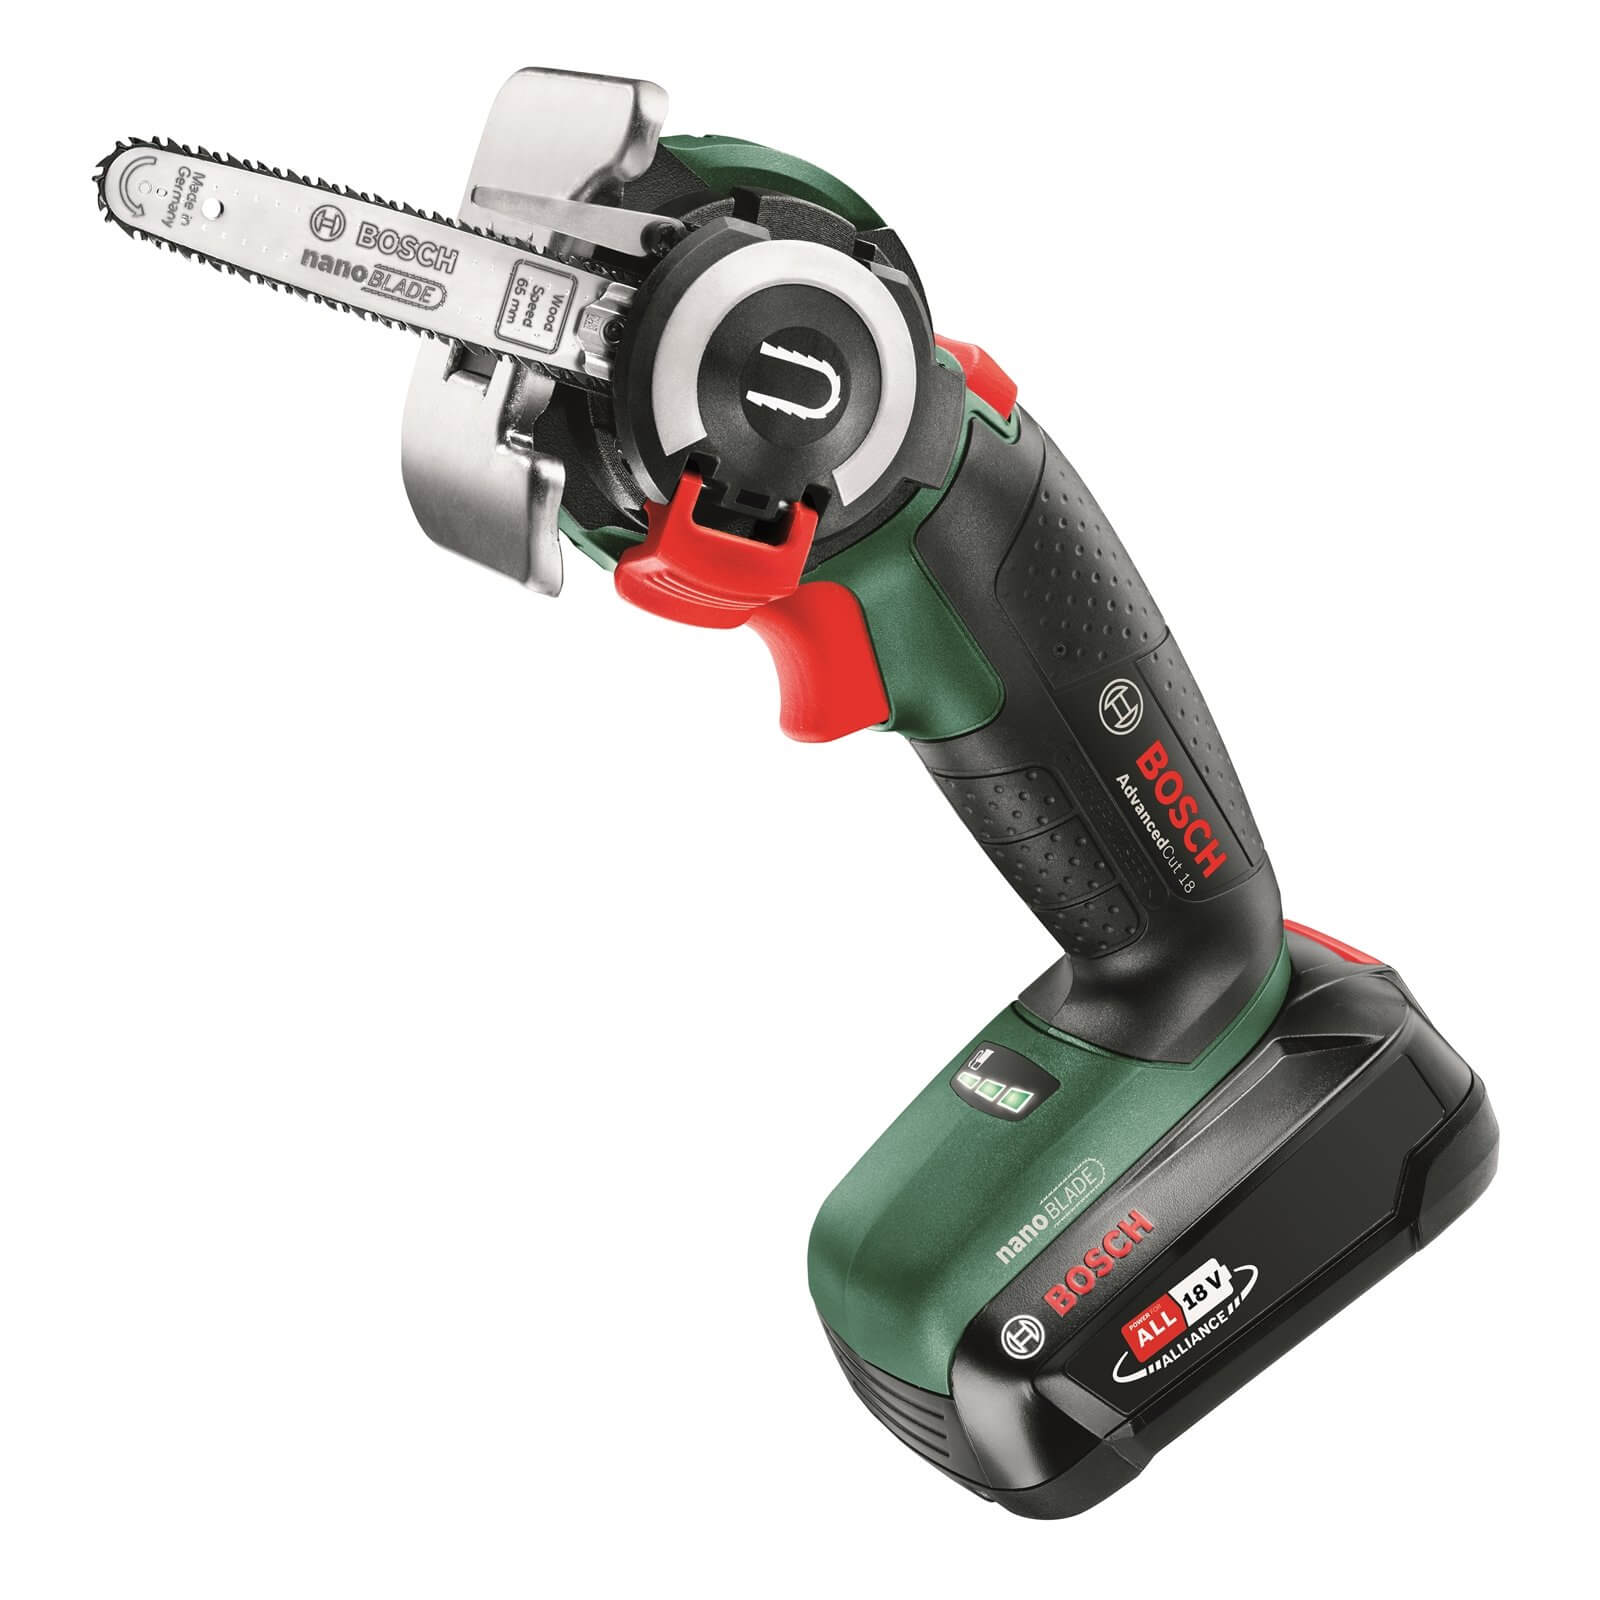 Bosch AdvancedCut 18 Cordless Specialised Saw